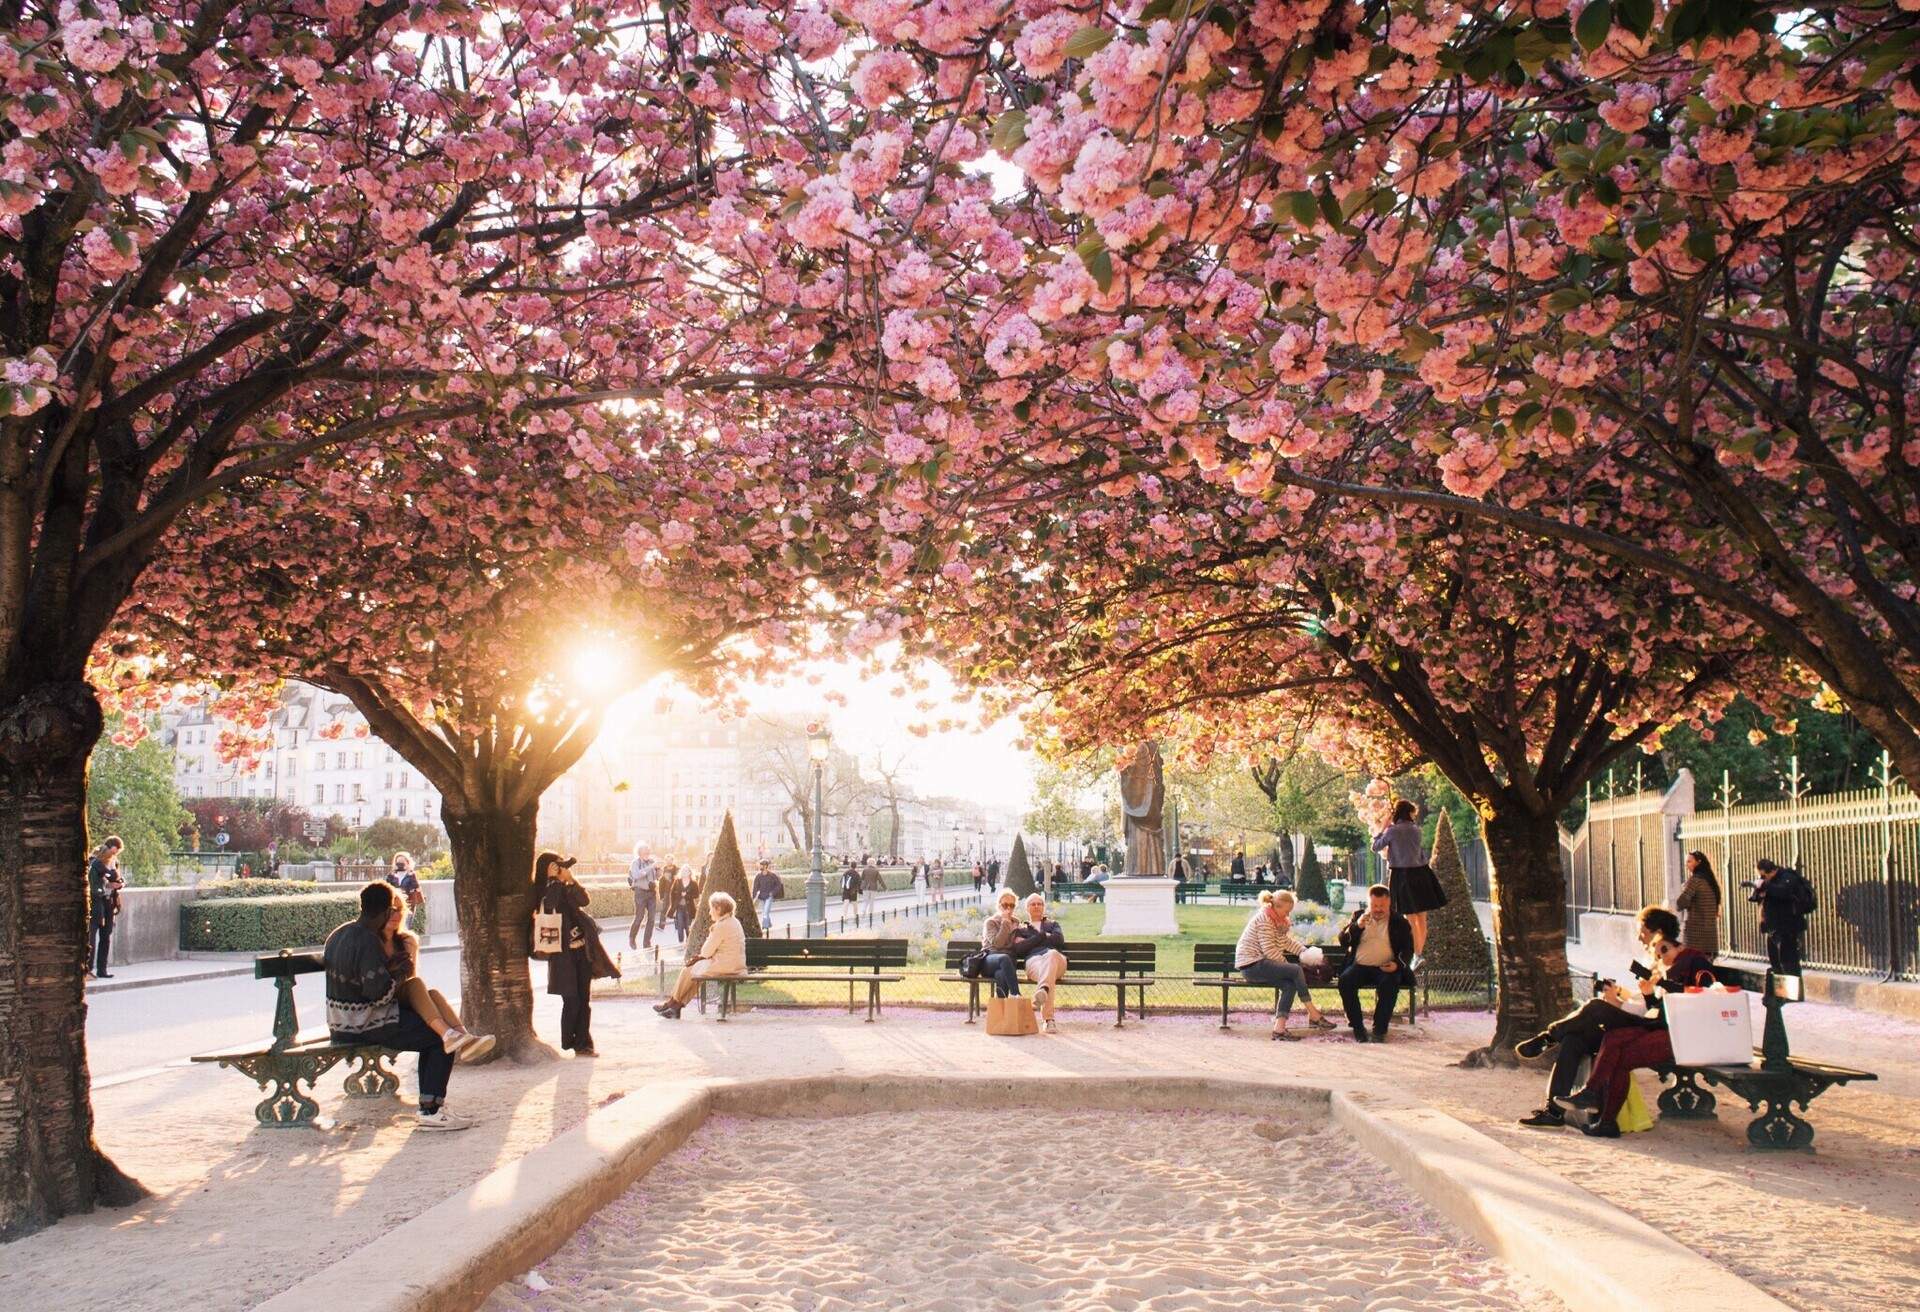 A park in Paris where the sun shines through some cherry blossoms coverings a lane of petanque surrounded by people chilling on benches 